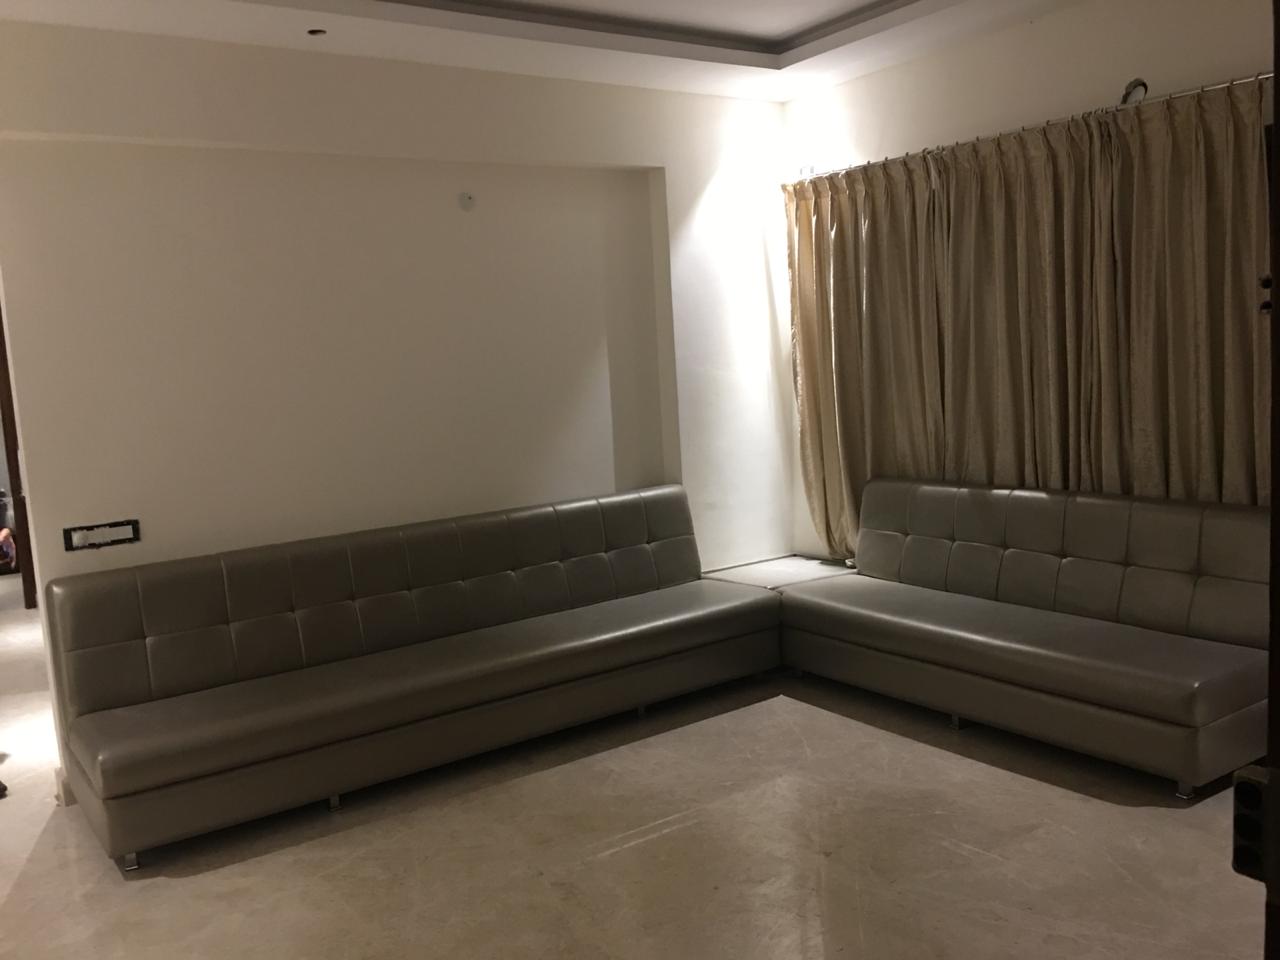 Benson Town: Exclusive 3 bedroom  furnished flat for rent